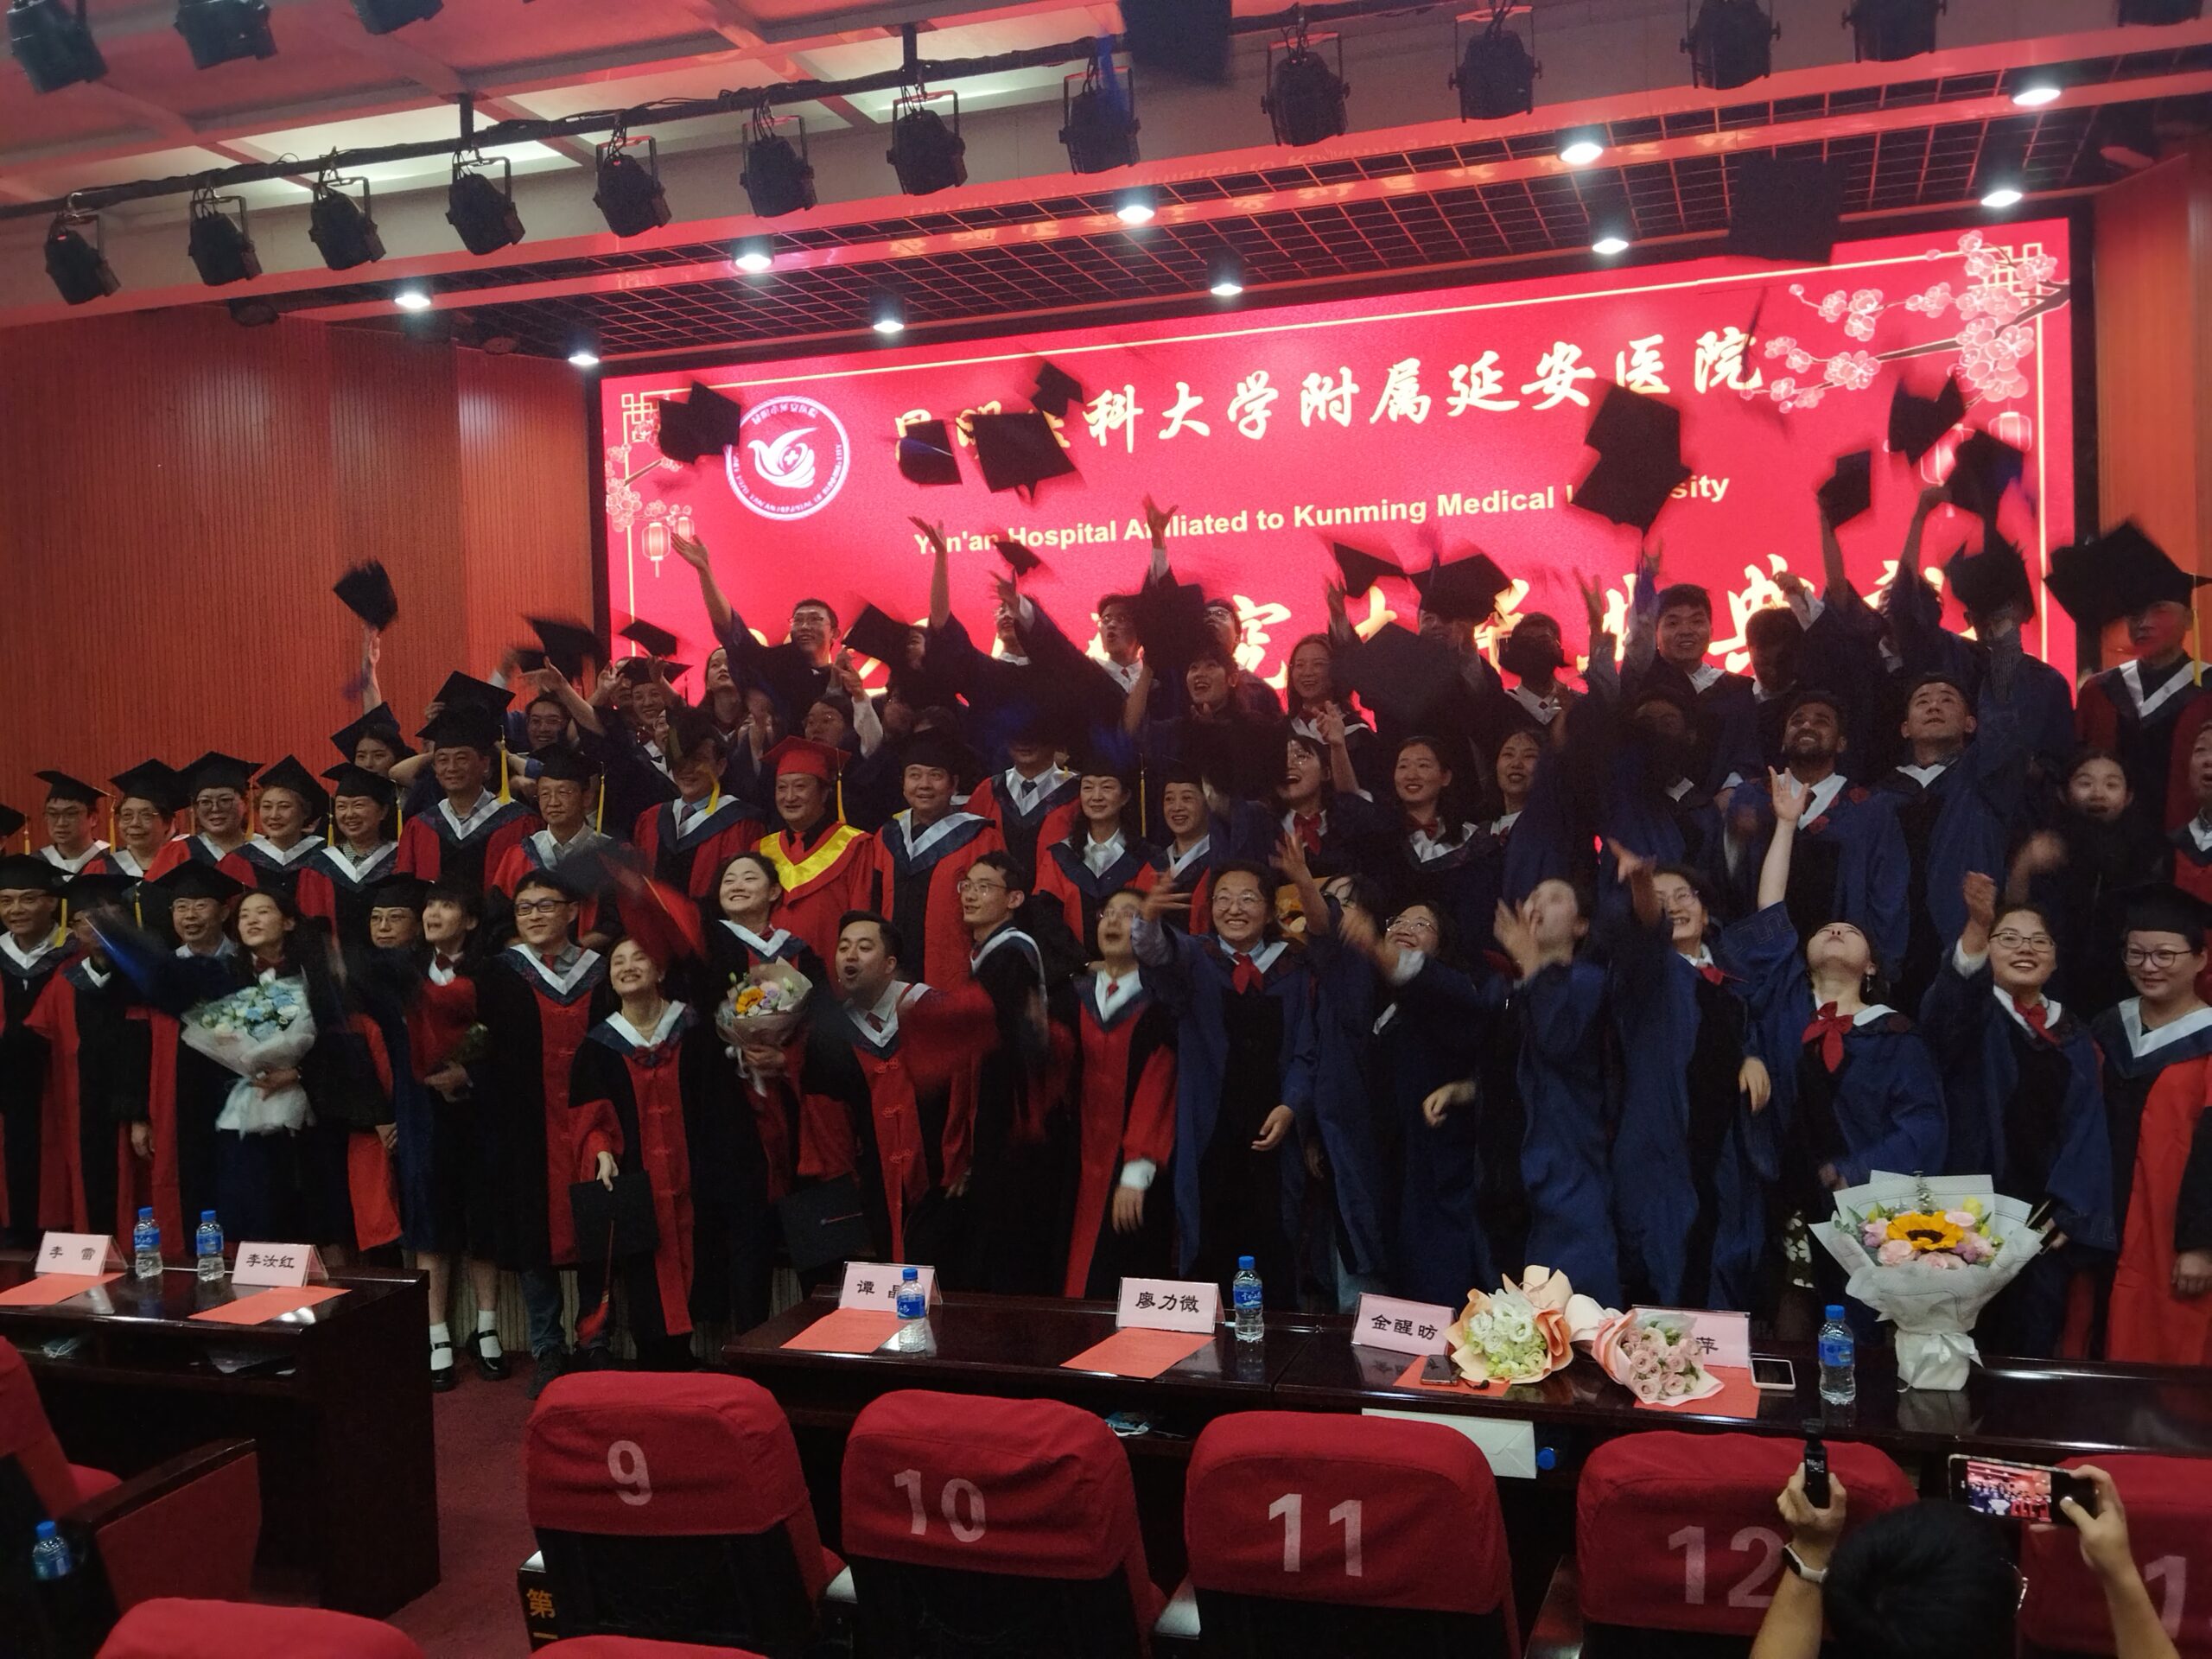 Yan an Hospital Affiliated to Kunming Medical University Graduation|| Kunming Medical University